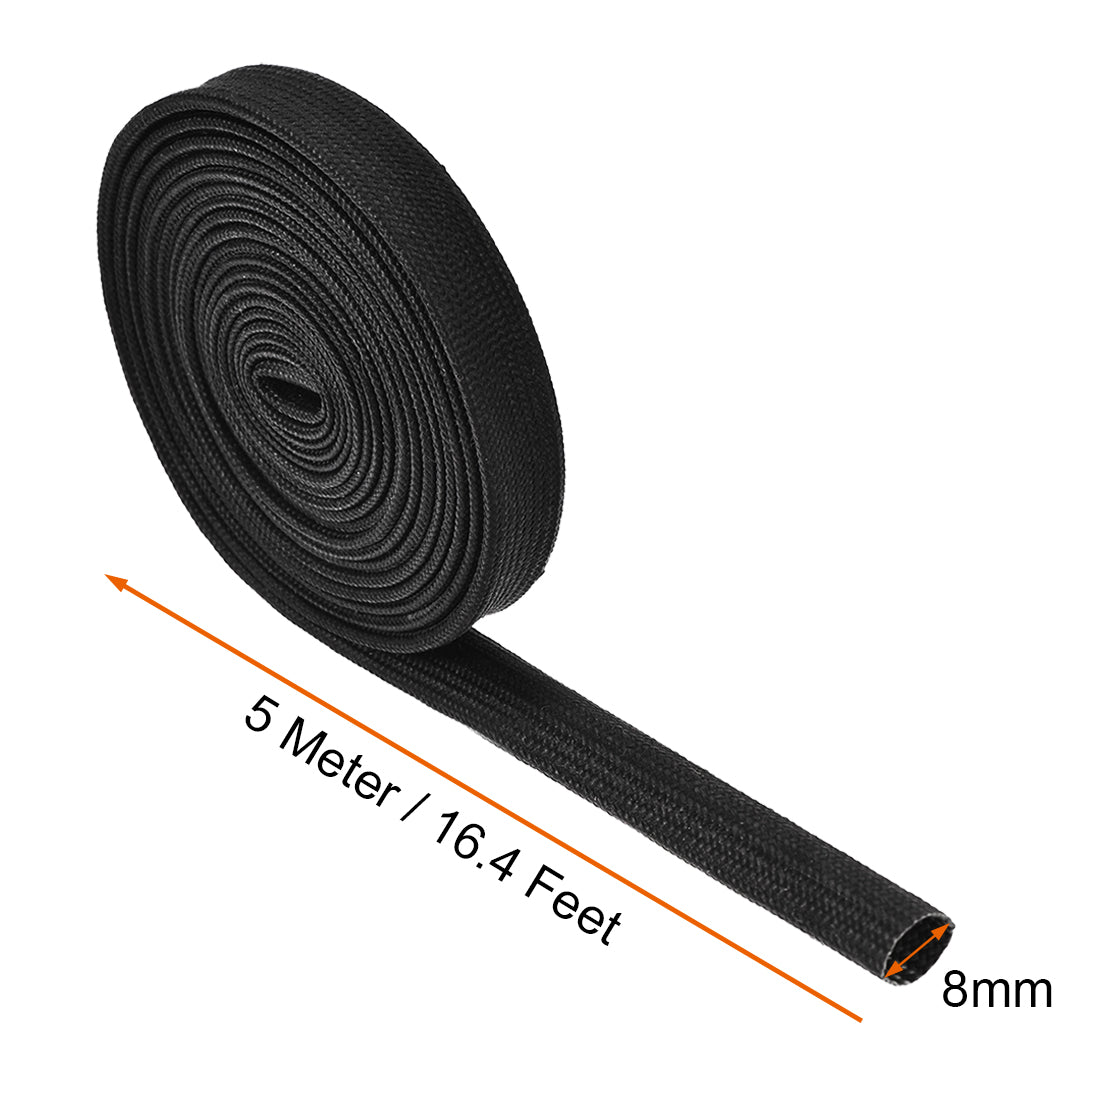 uxcell Uxcell Insulation Cable Protector,16.4Ft-8mm High TEMP Silicone Fiberglass Sleeve Black